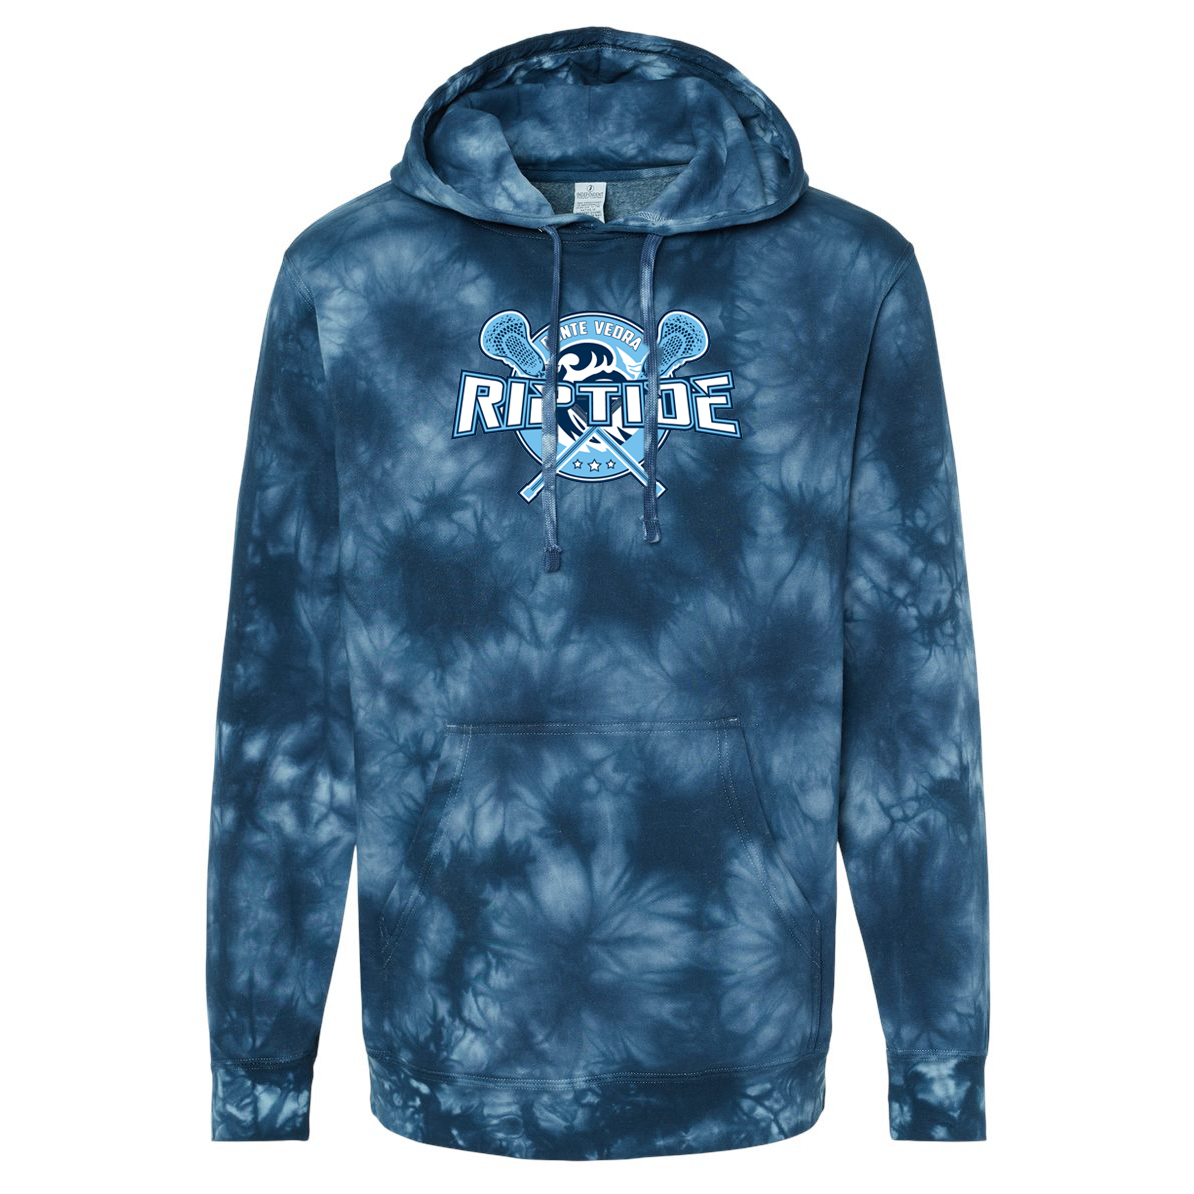 Ponte Vedra Riptide Lacrosse Independent Trading Co. Pigment-Dyed Hooded Sweatshirt